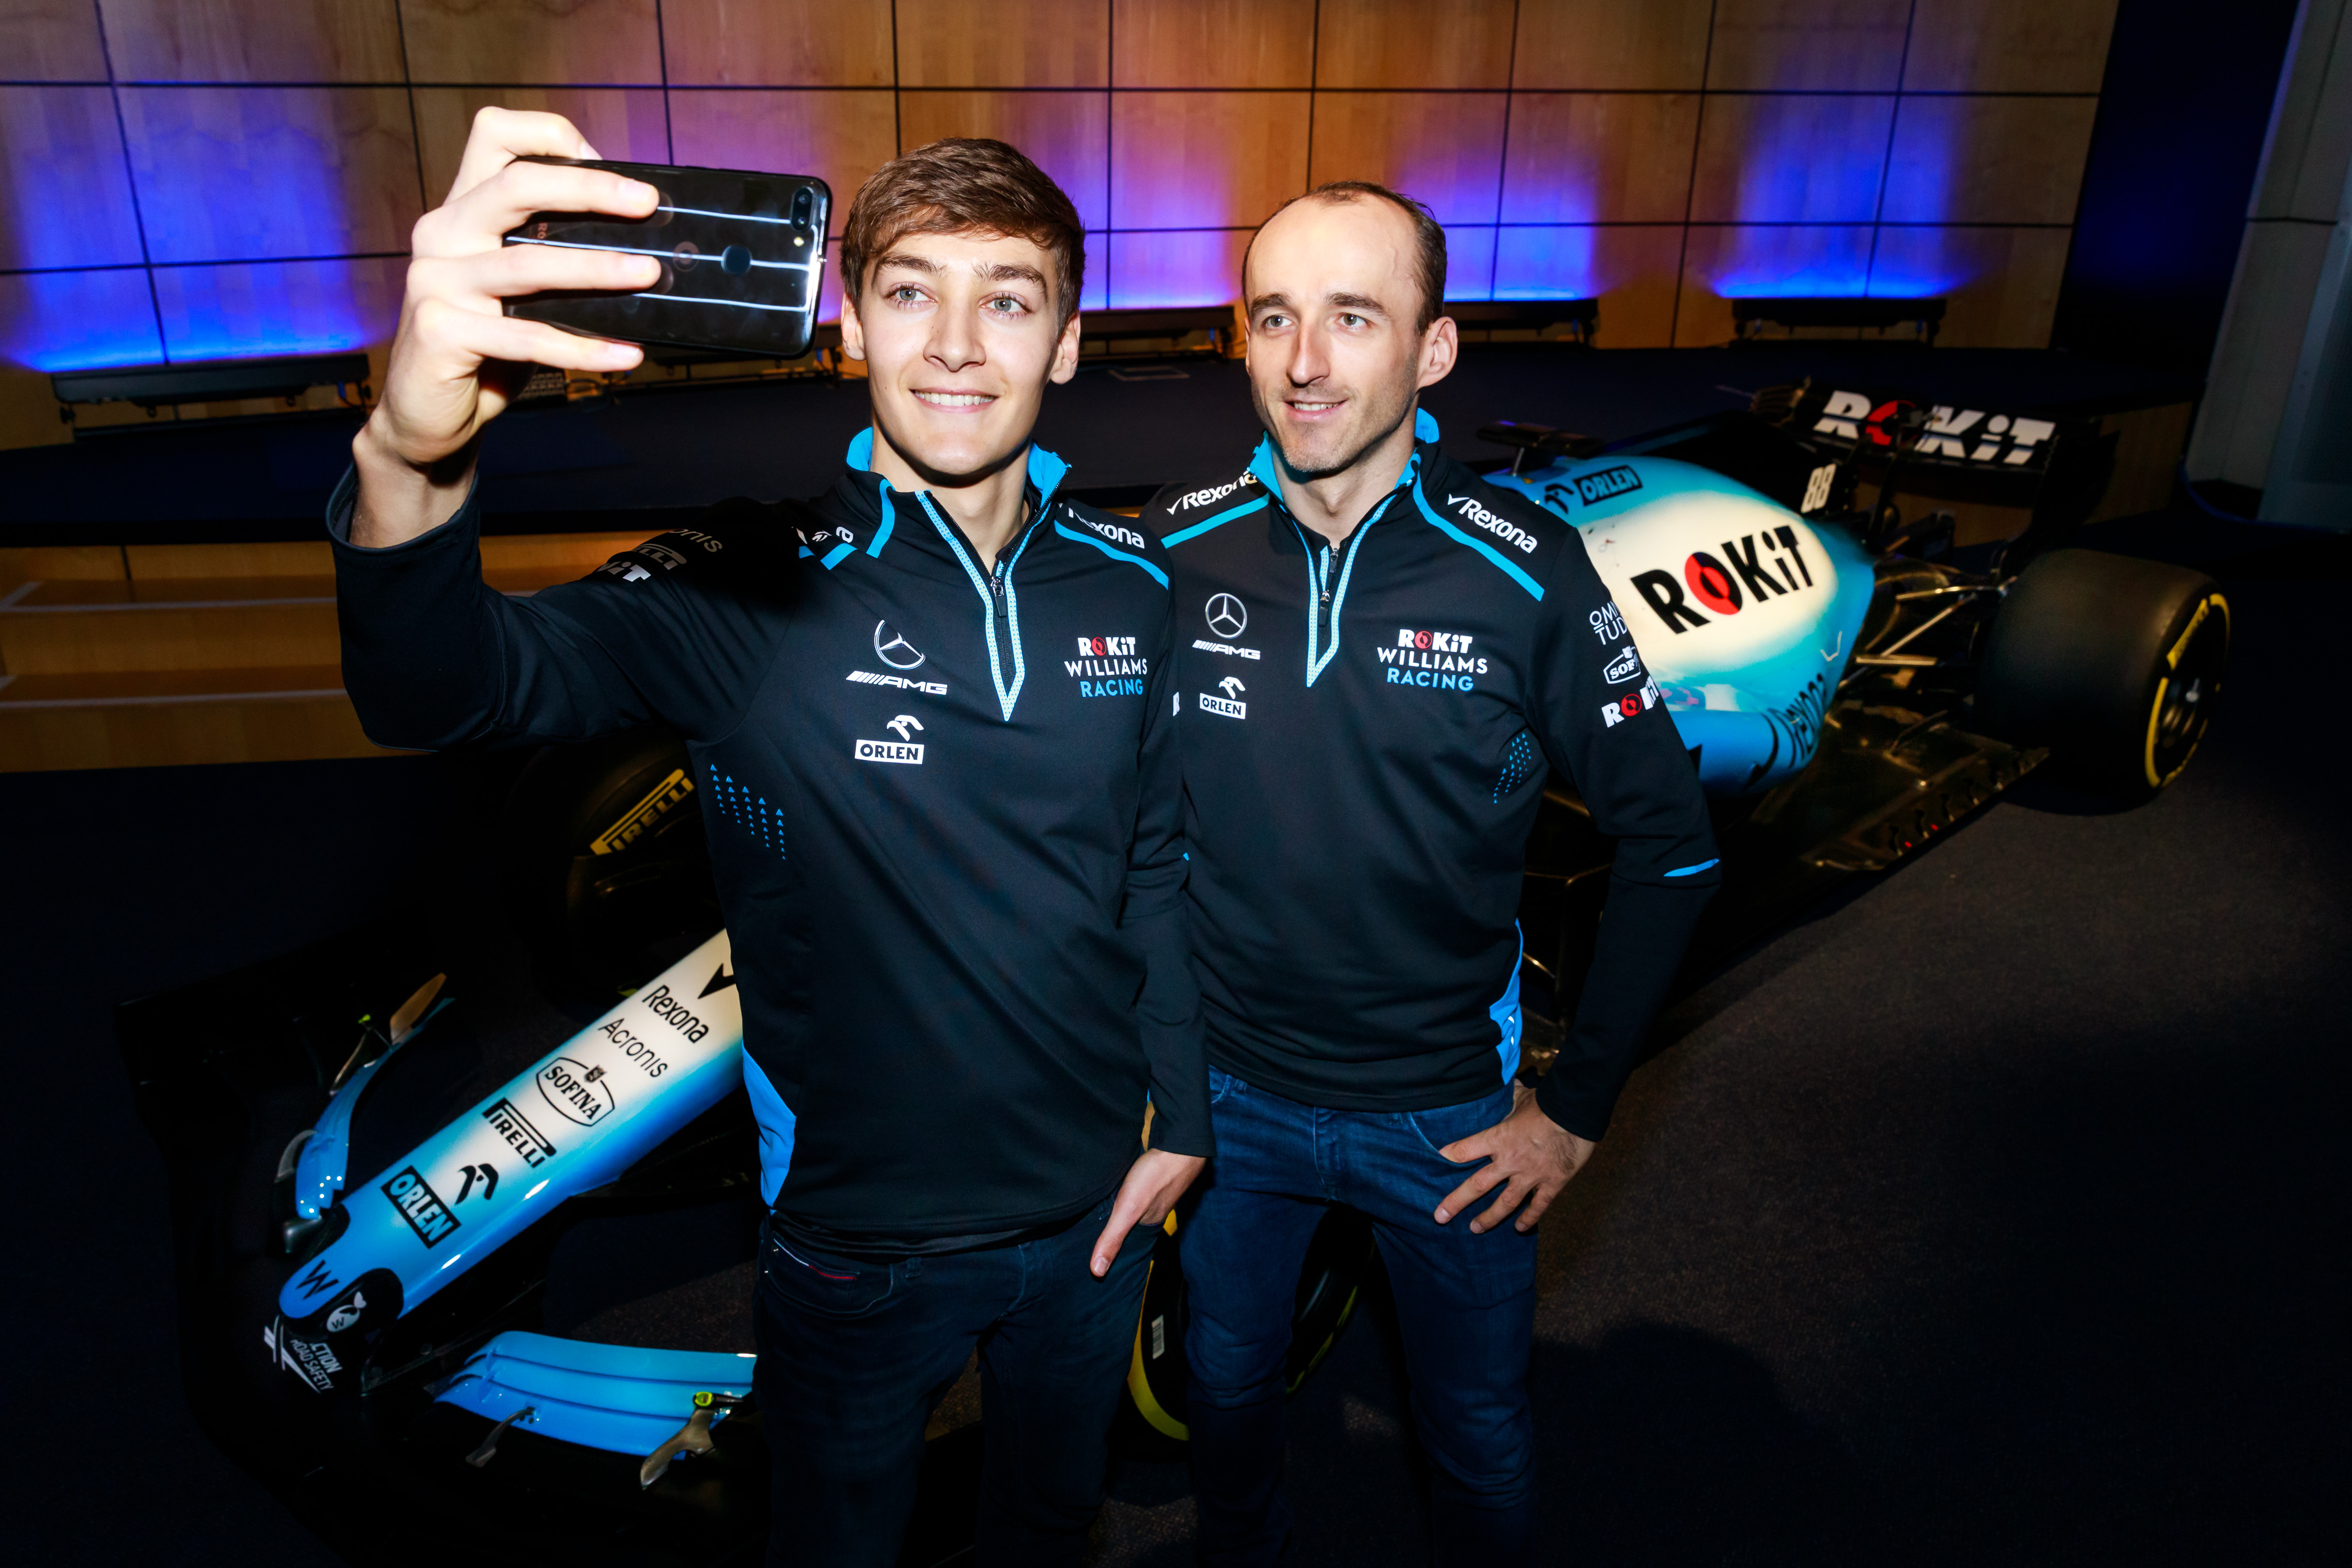 ROKiT signs F1 sponsorship deal with Williams | Shropshire Star